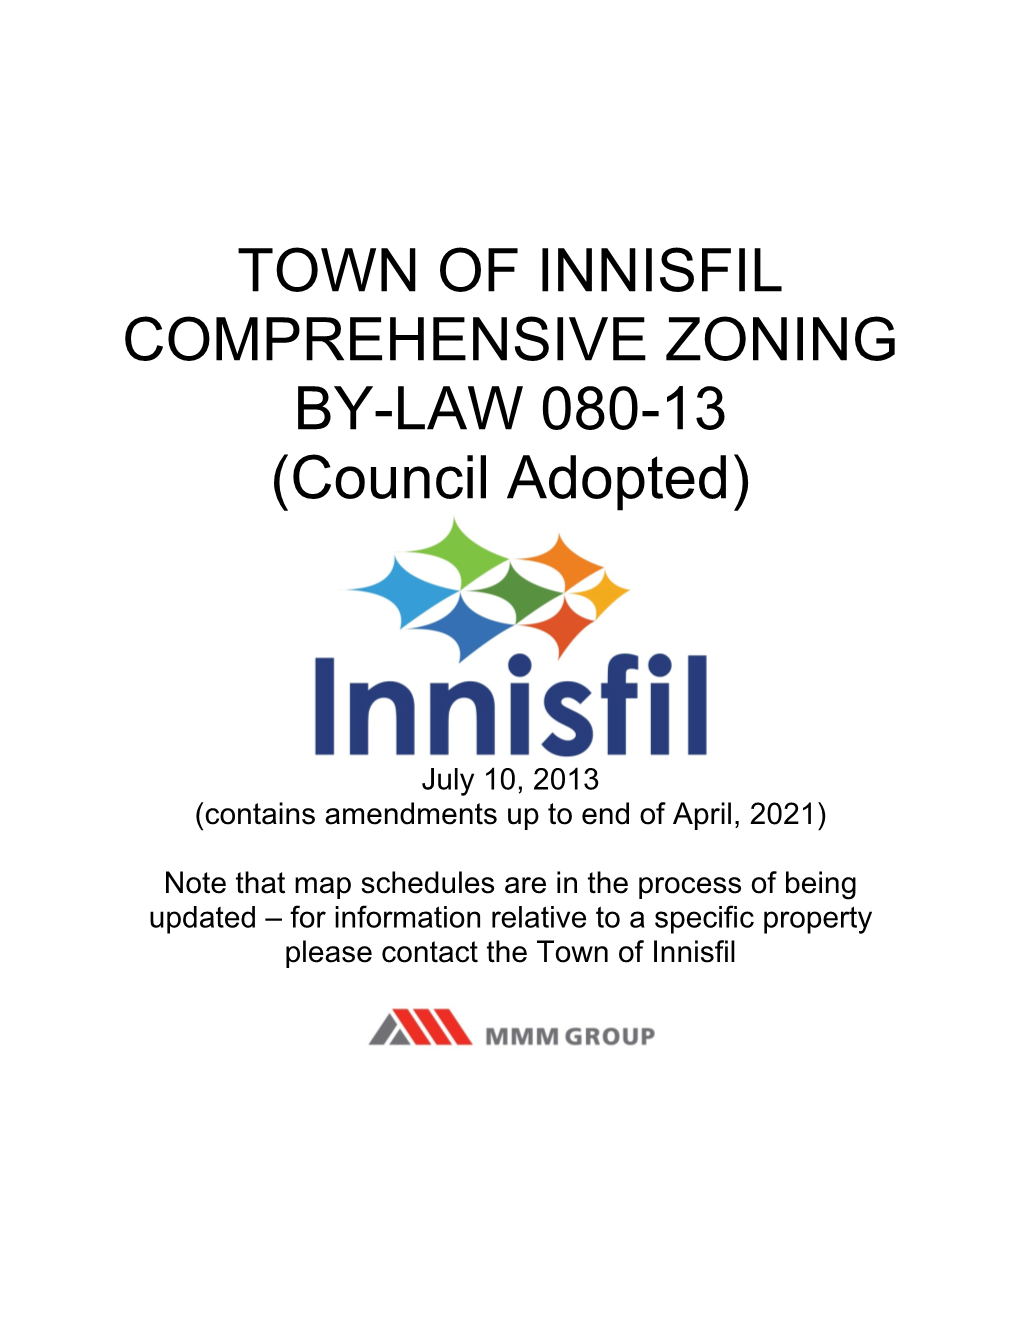 Zoning By-Law 080-13